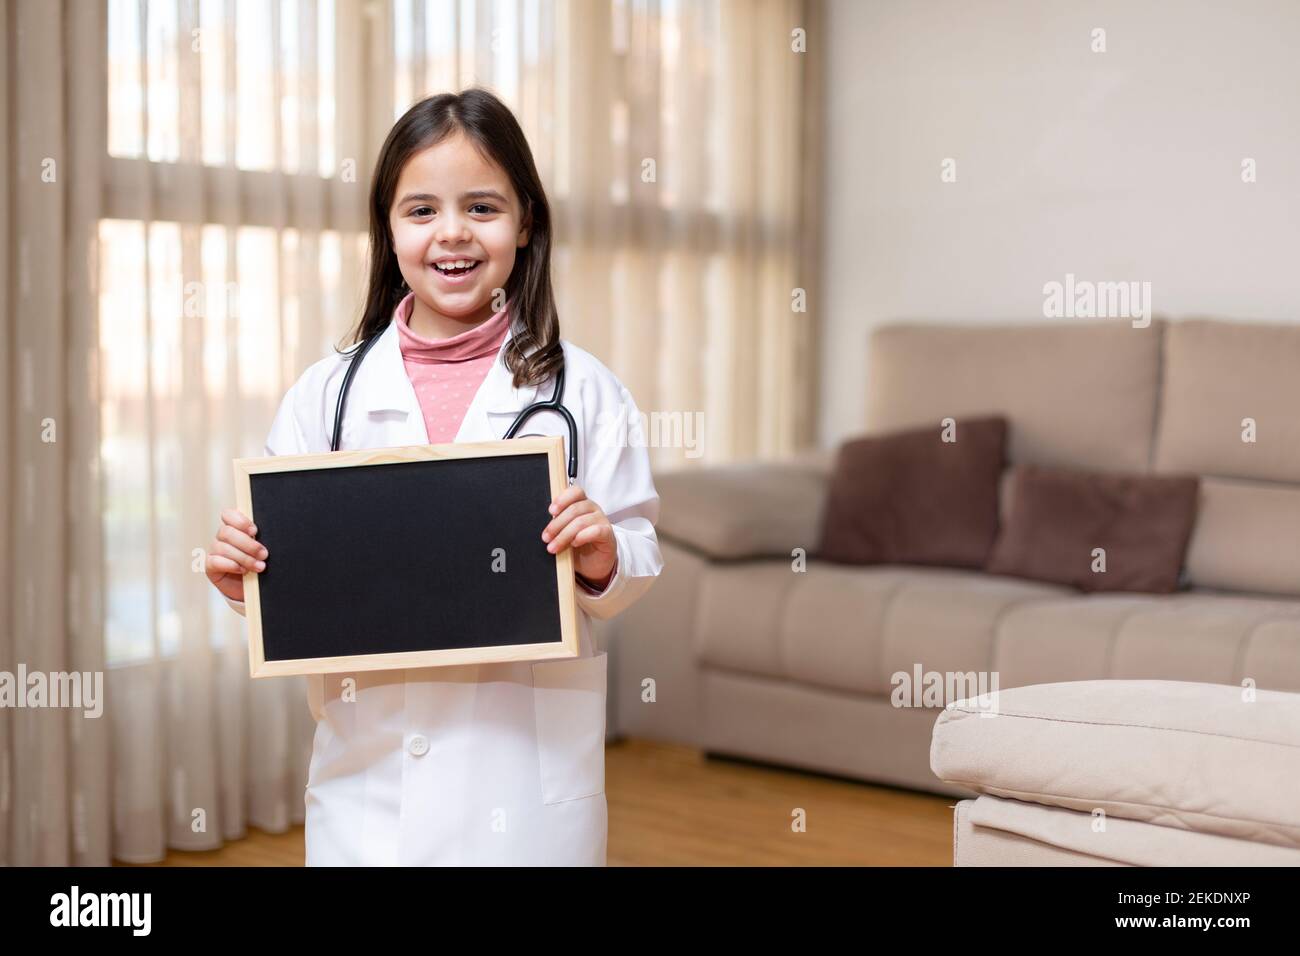 Smiling little child in doctor's uniform holding a blackboard at home. Space for text. Stock Photo